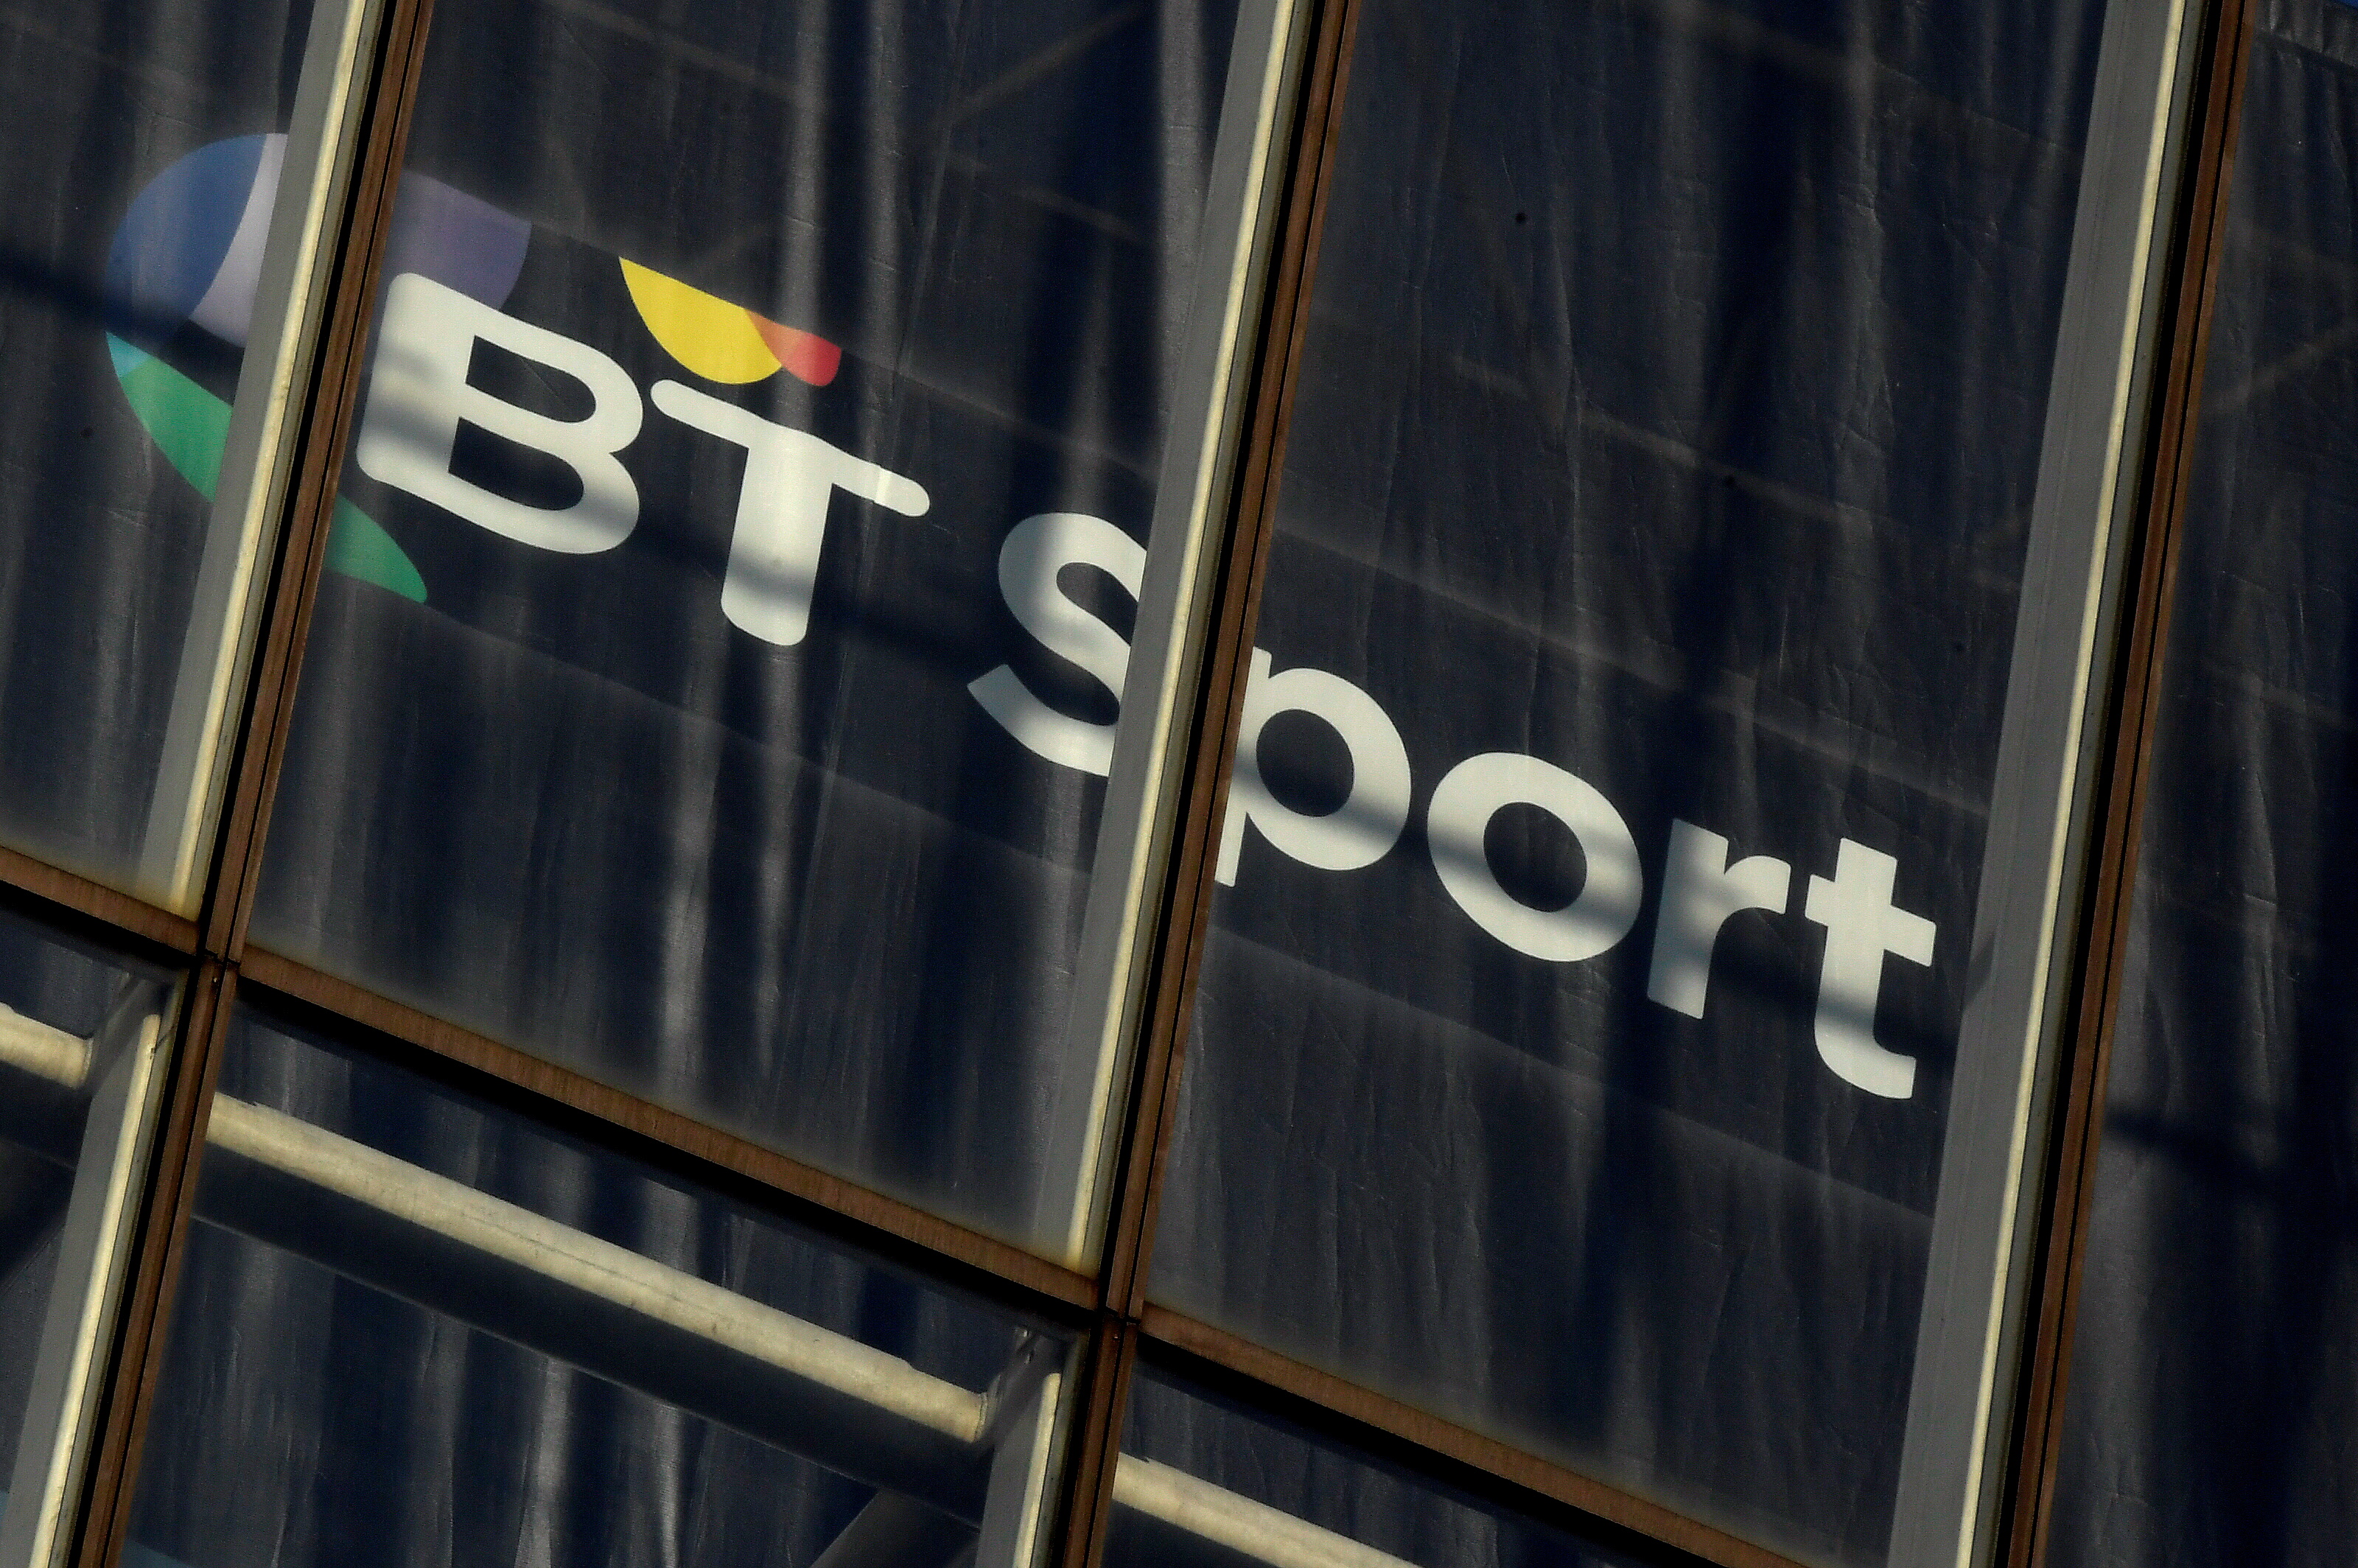 A BT Sport logo is displayed in an office in the City of London, Britain, January 24, 2017. REUTERS/Toby Melville